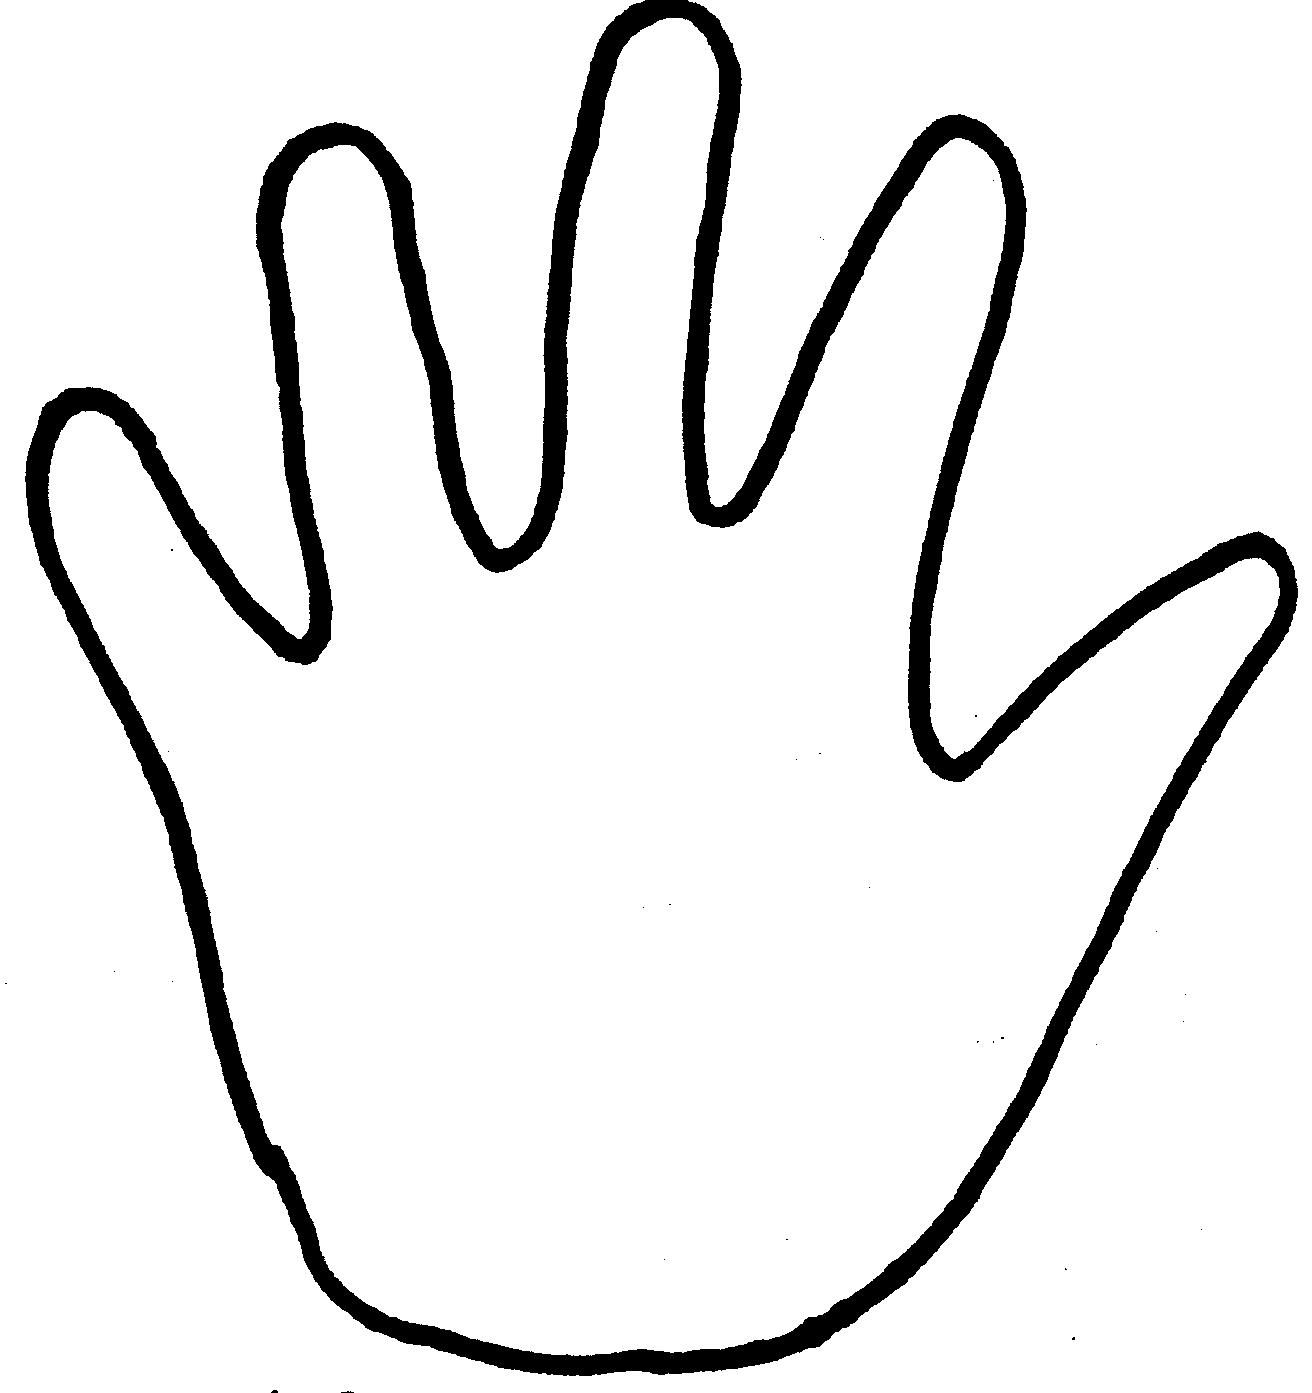 Hands Coloring Pages Hand Washing Coloring Sheets | Kids Coloring ...